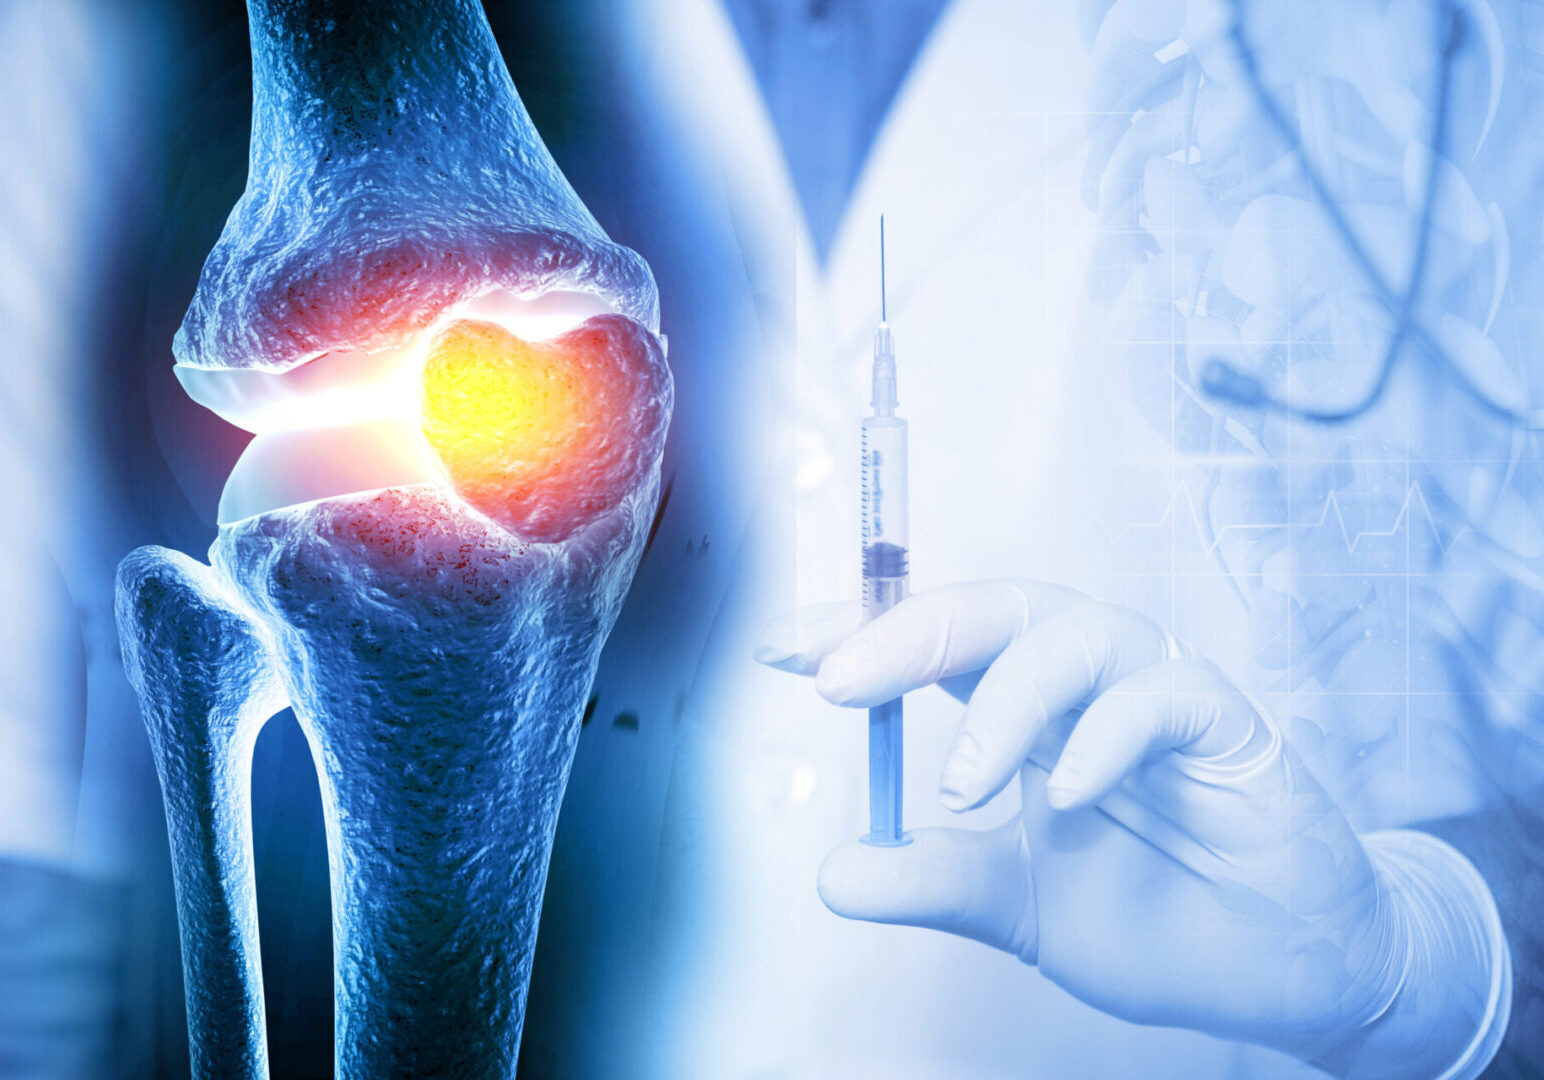 A person holding a needle in their hand and an image of a knee.